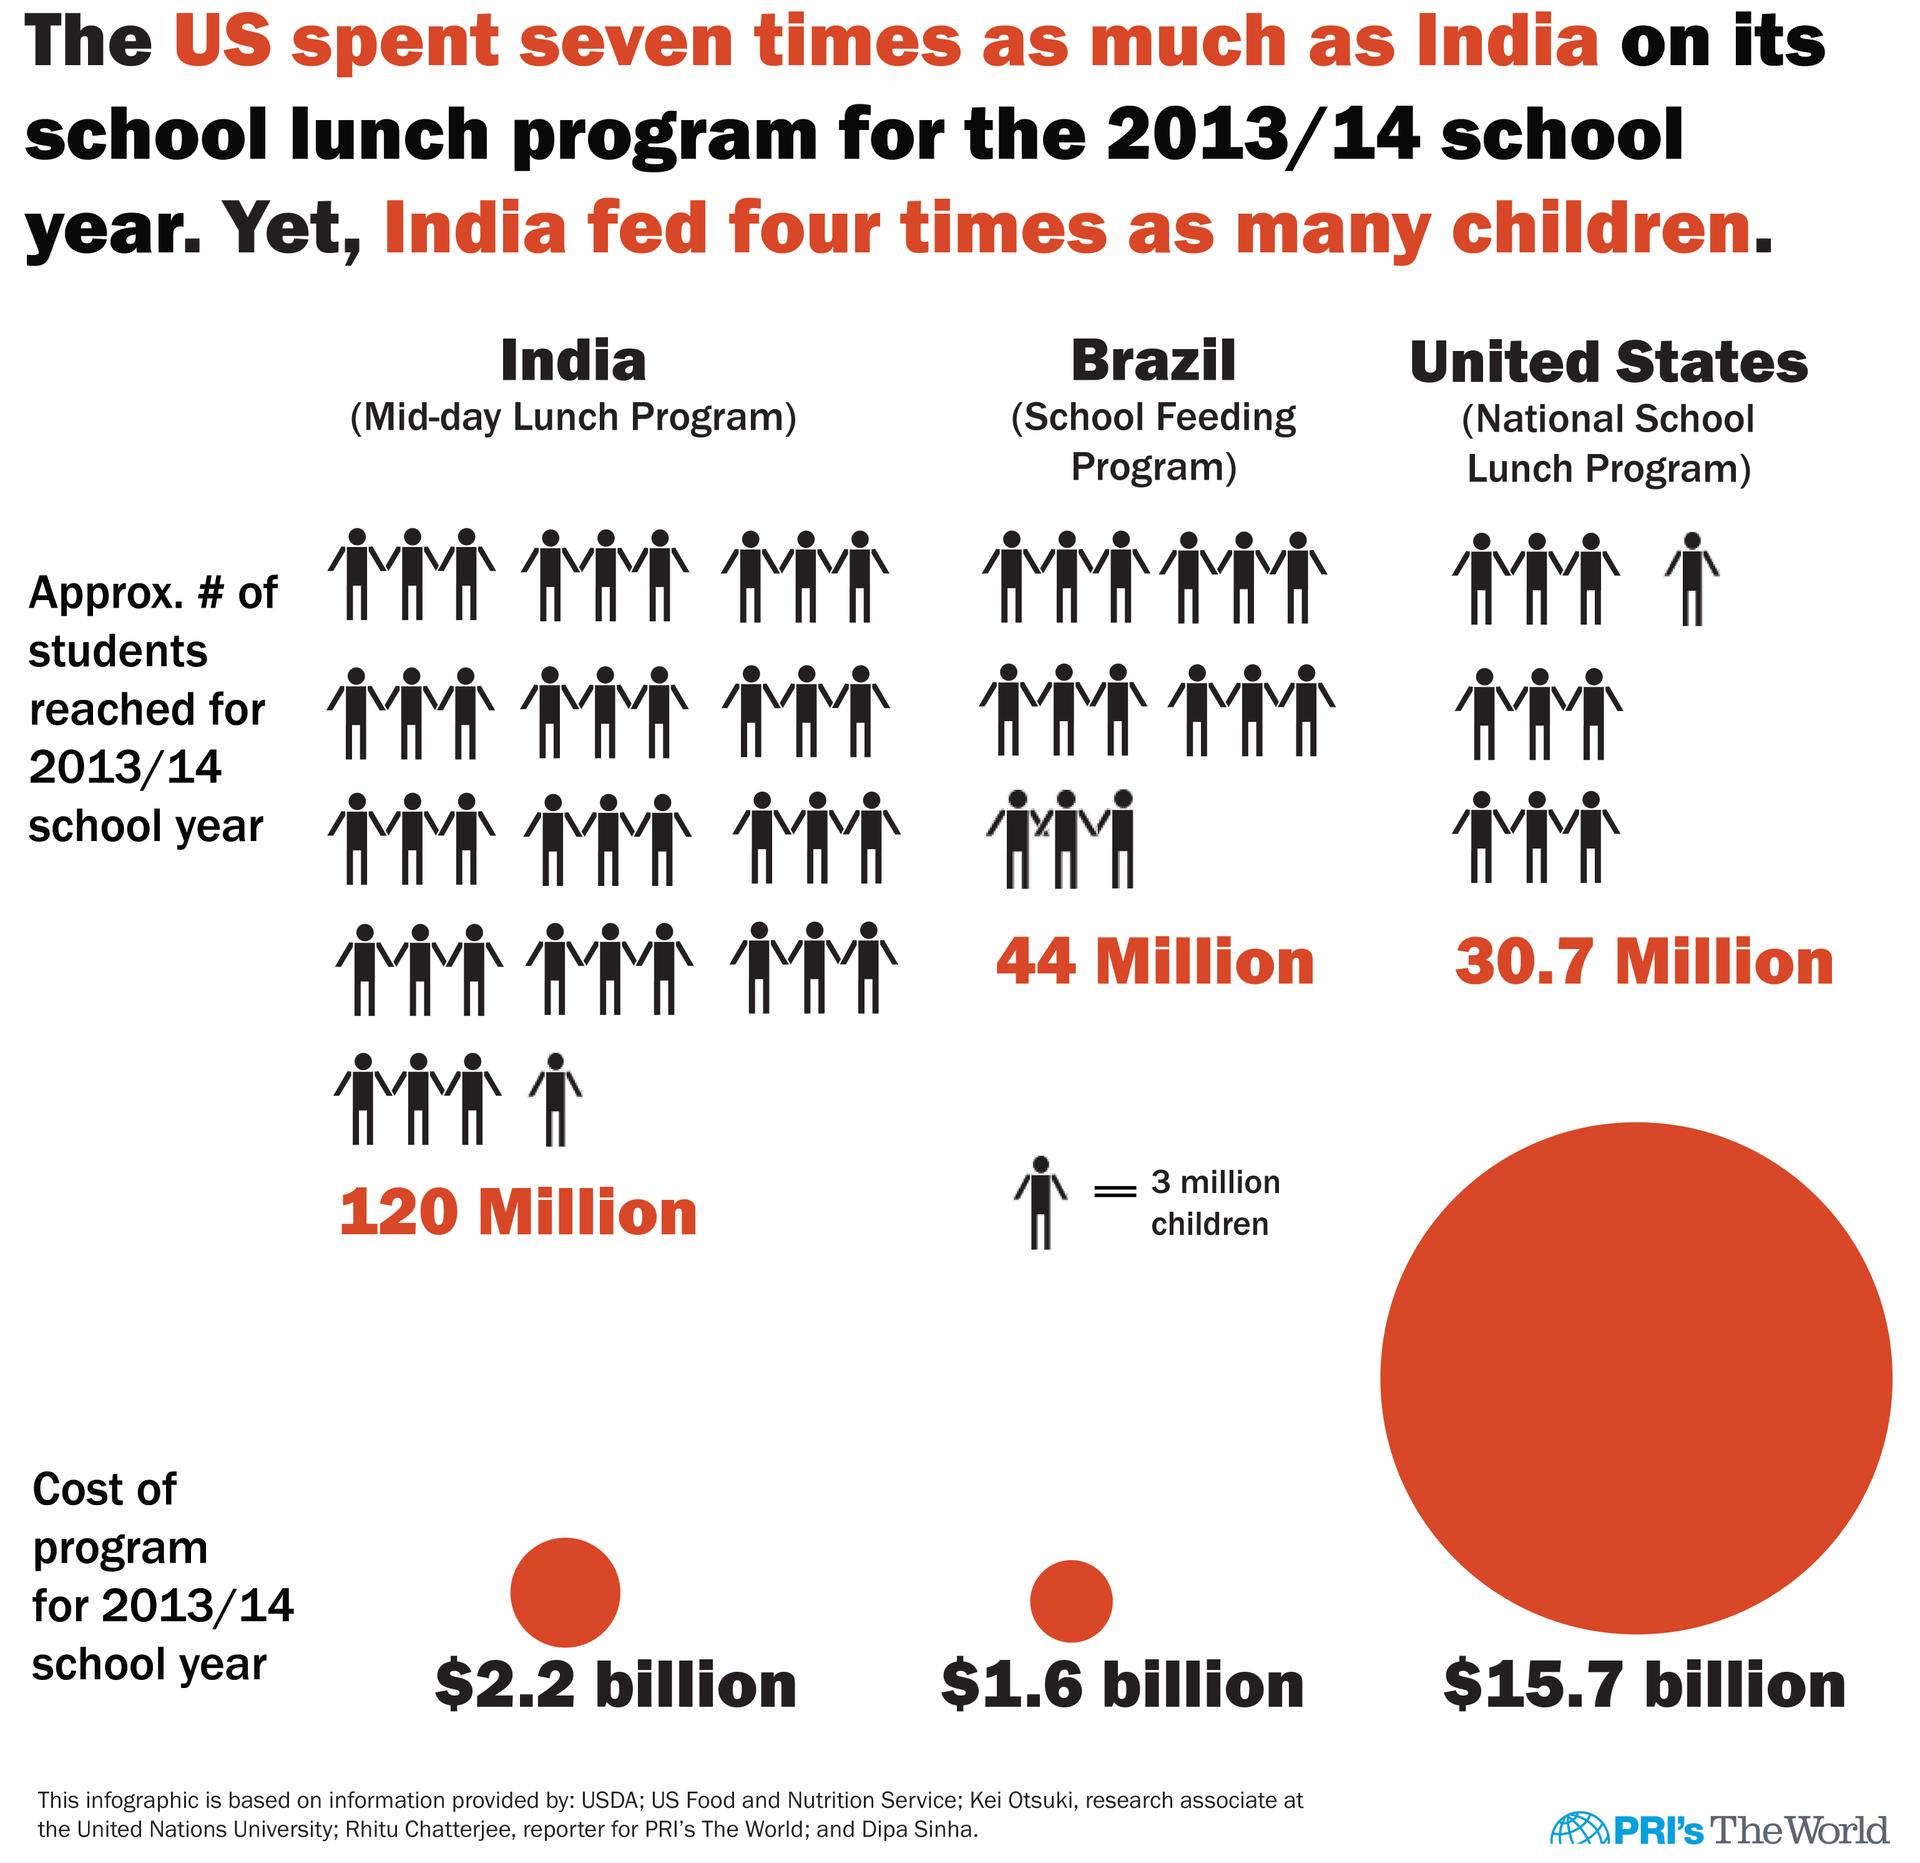 BRIC countries Brazil and India have installed national feeding initiatives that cost far less than the US national school lunch program. But they are feeding far more children.